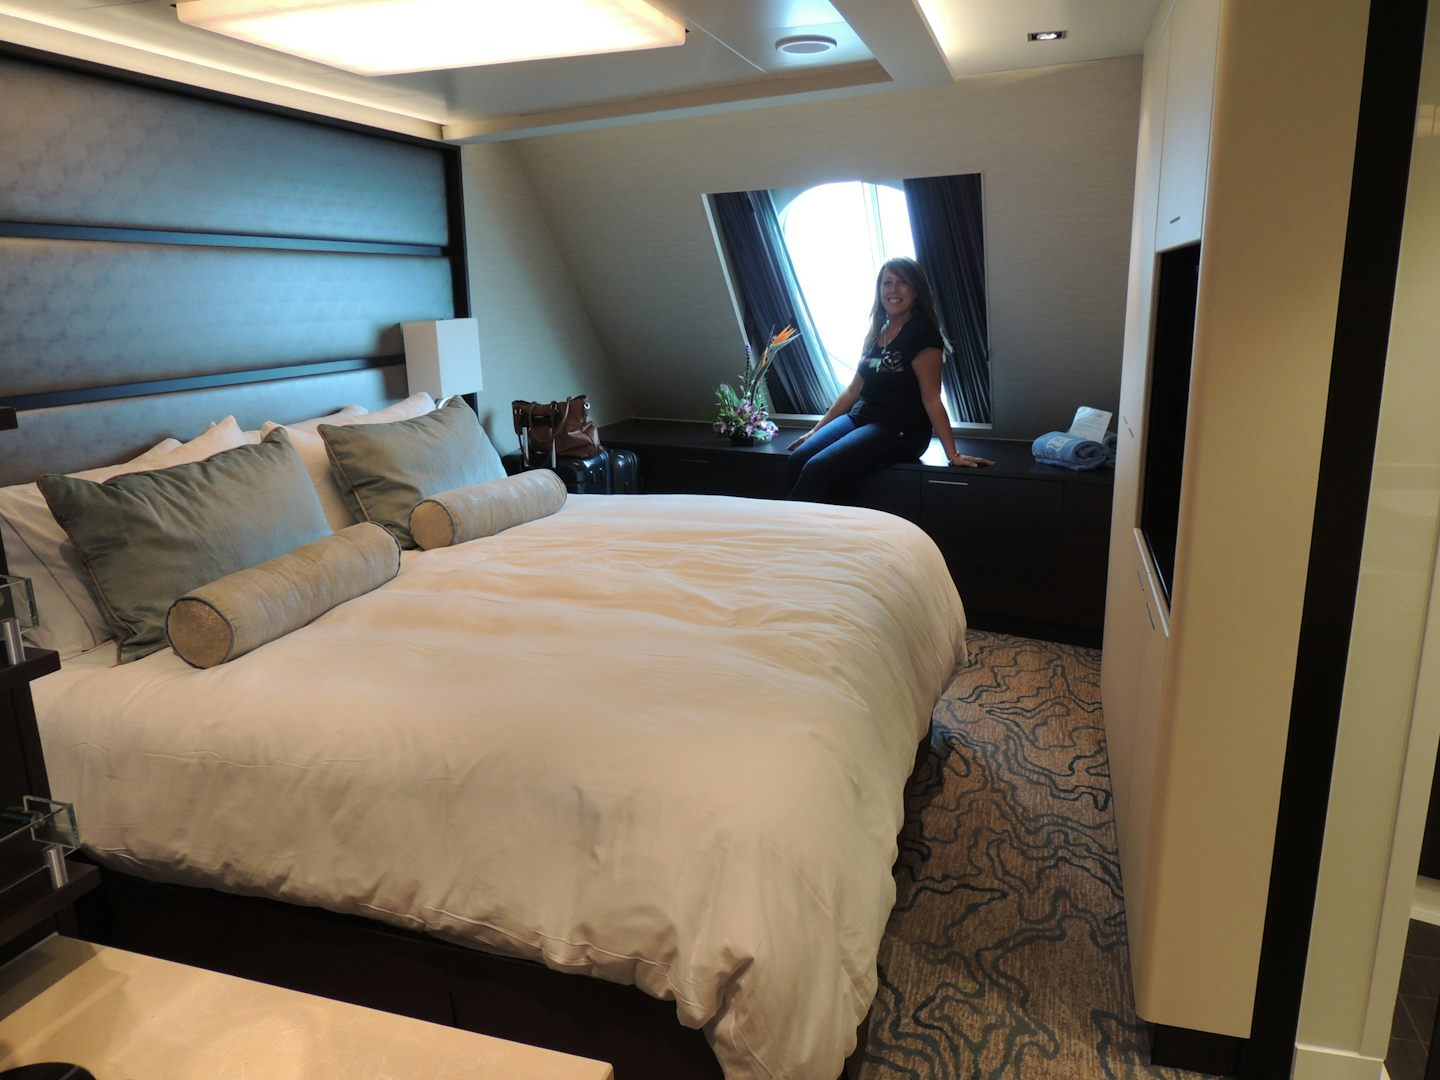 Haven H7 category, Aft forward Facing Penthouse Suite #9706.
Bed is a true